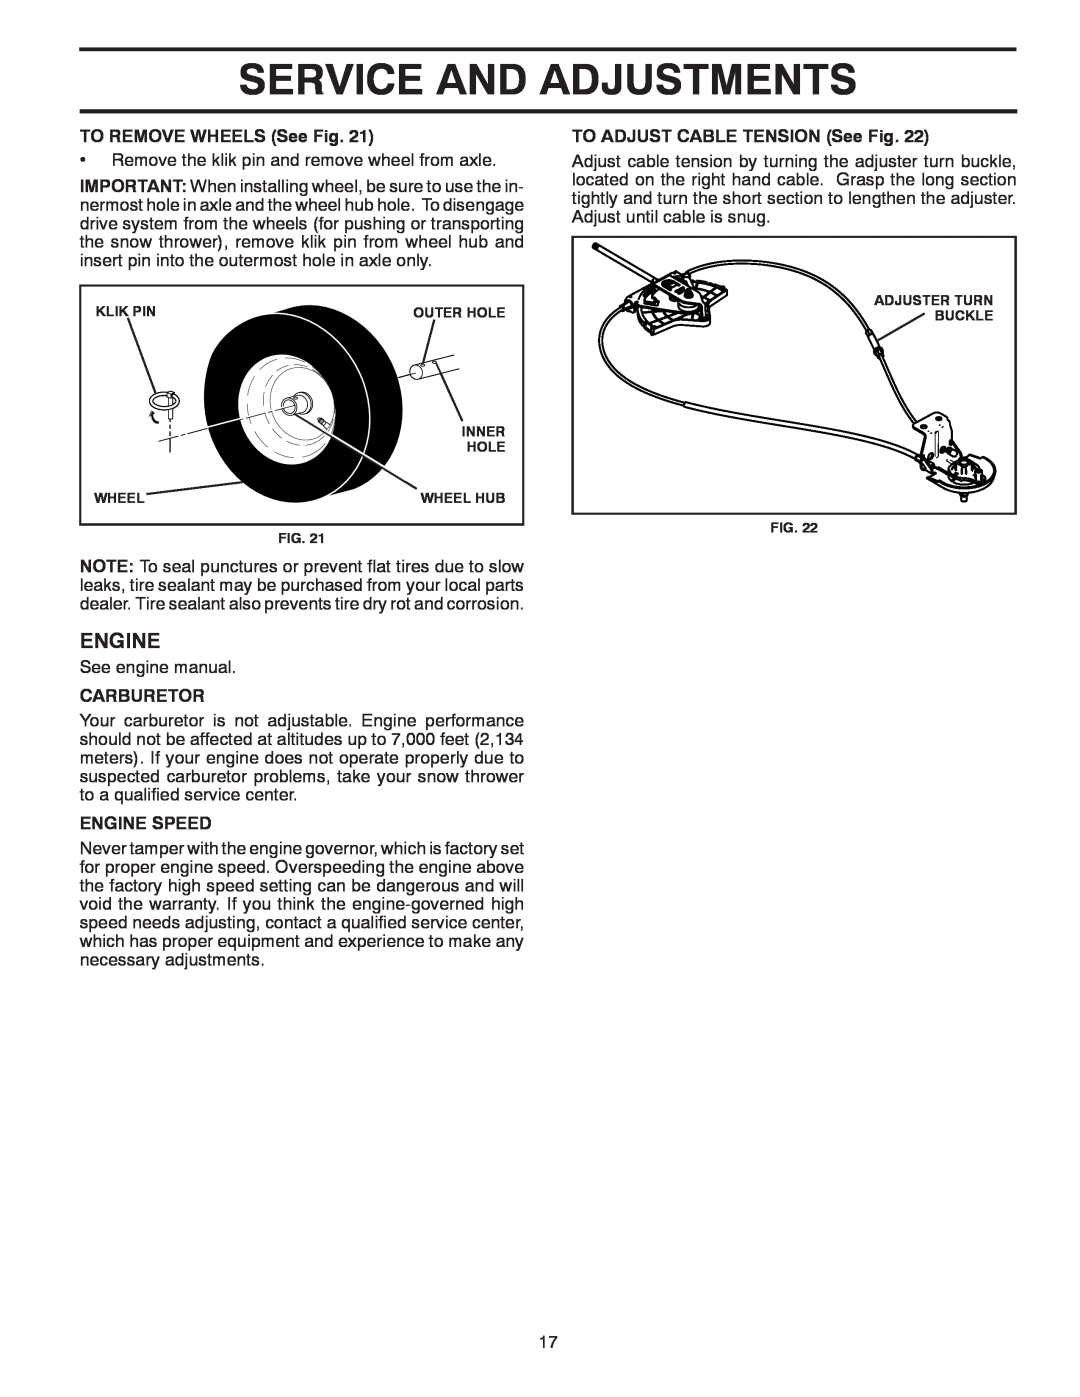 McCulloch 96192004101 owner manual Service And Adjustments, TO REMOVE WHEELS See Fig, Carburetor, Engine Speed 